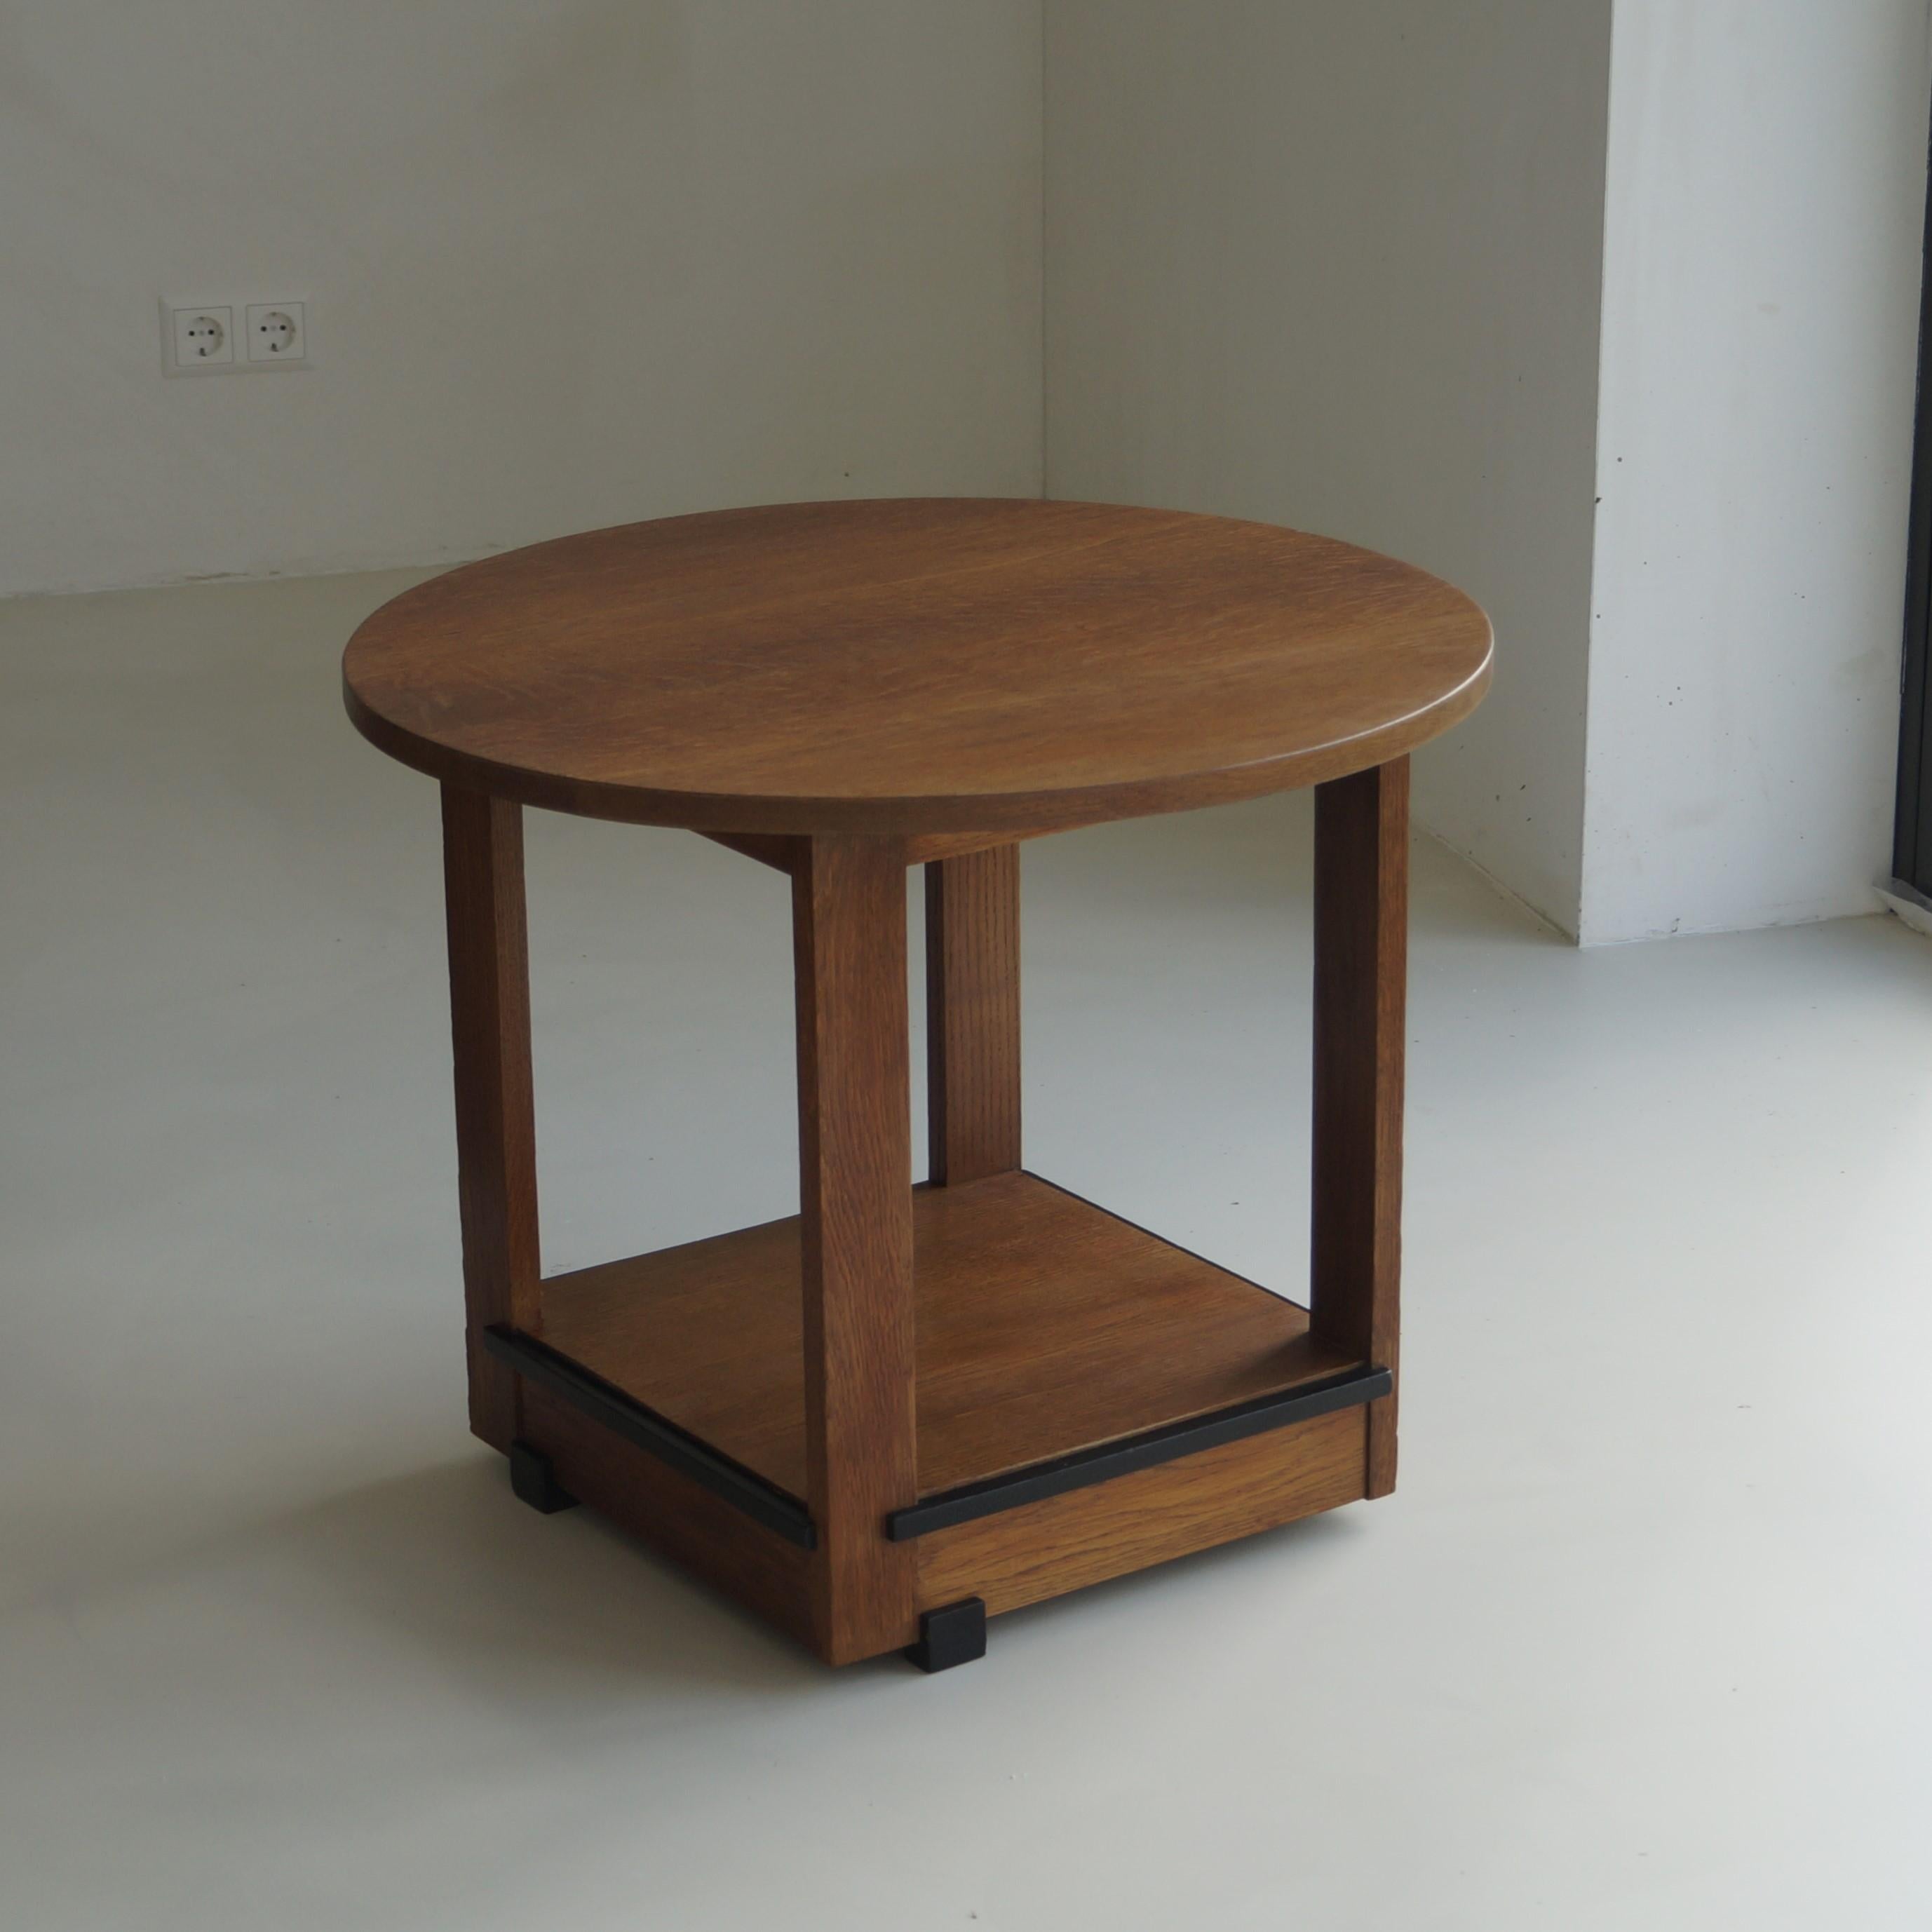 Modernist Dutch Art Deco occasional table attributed to Jan Brunott, 1920s For Sale 7